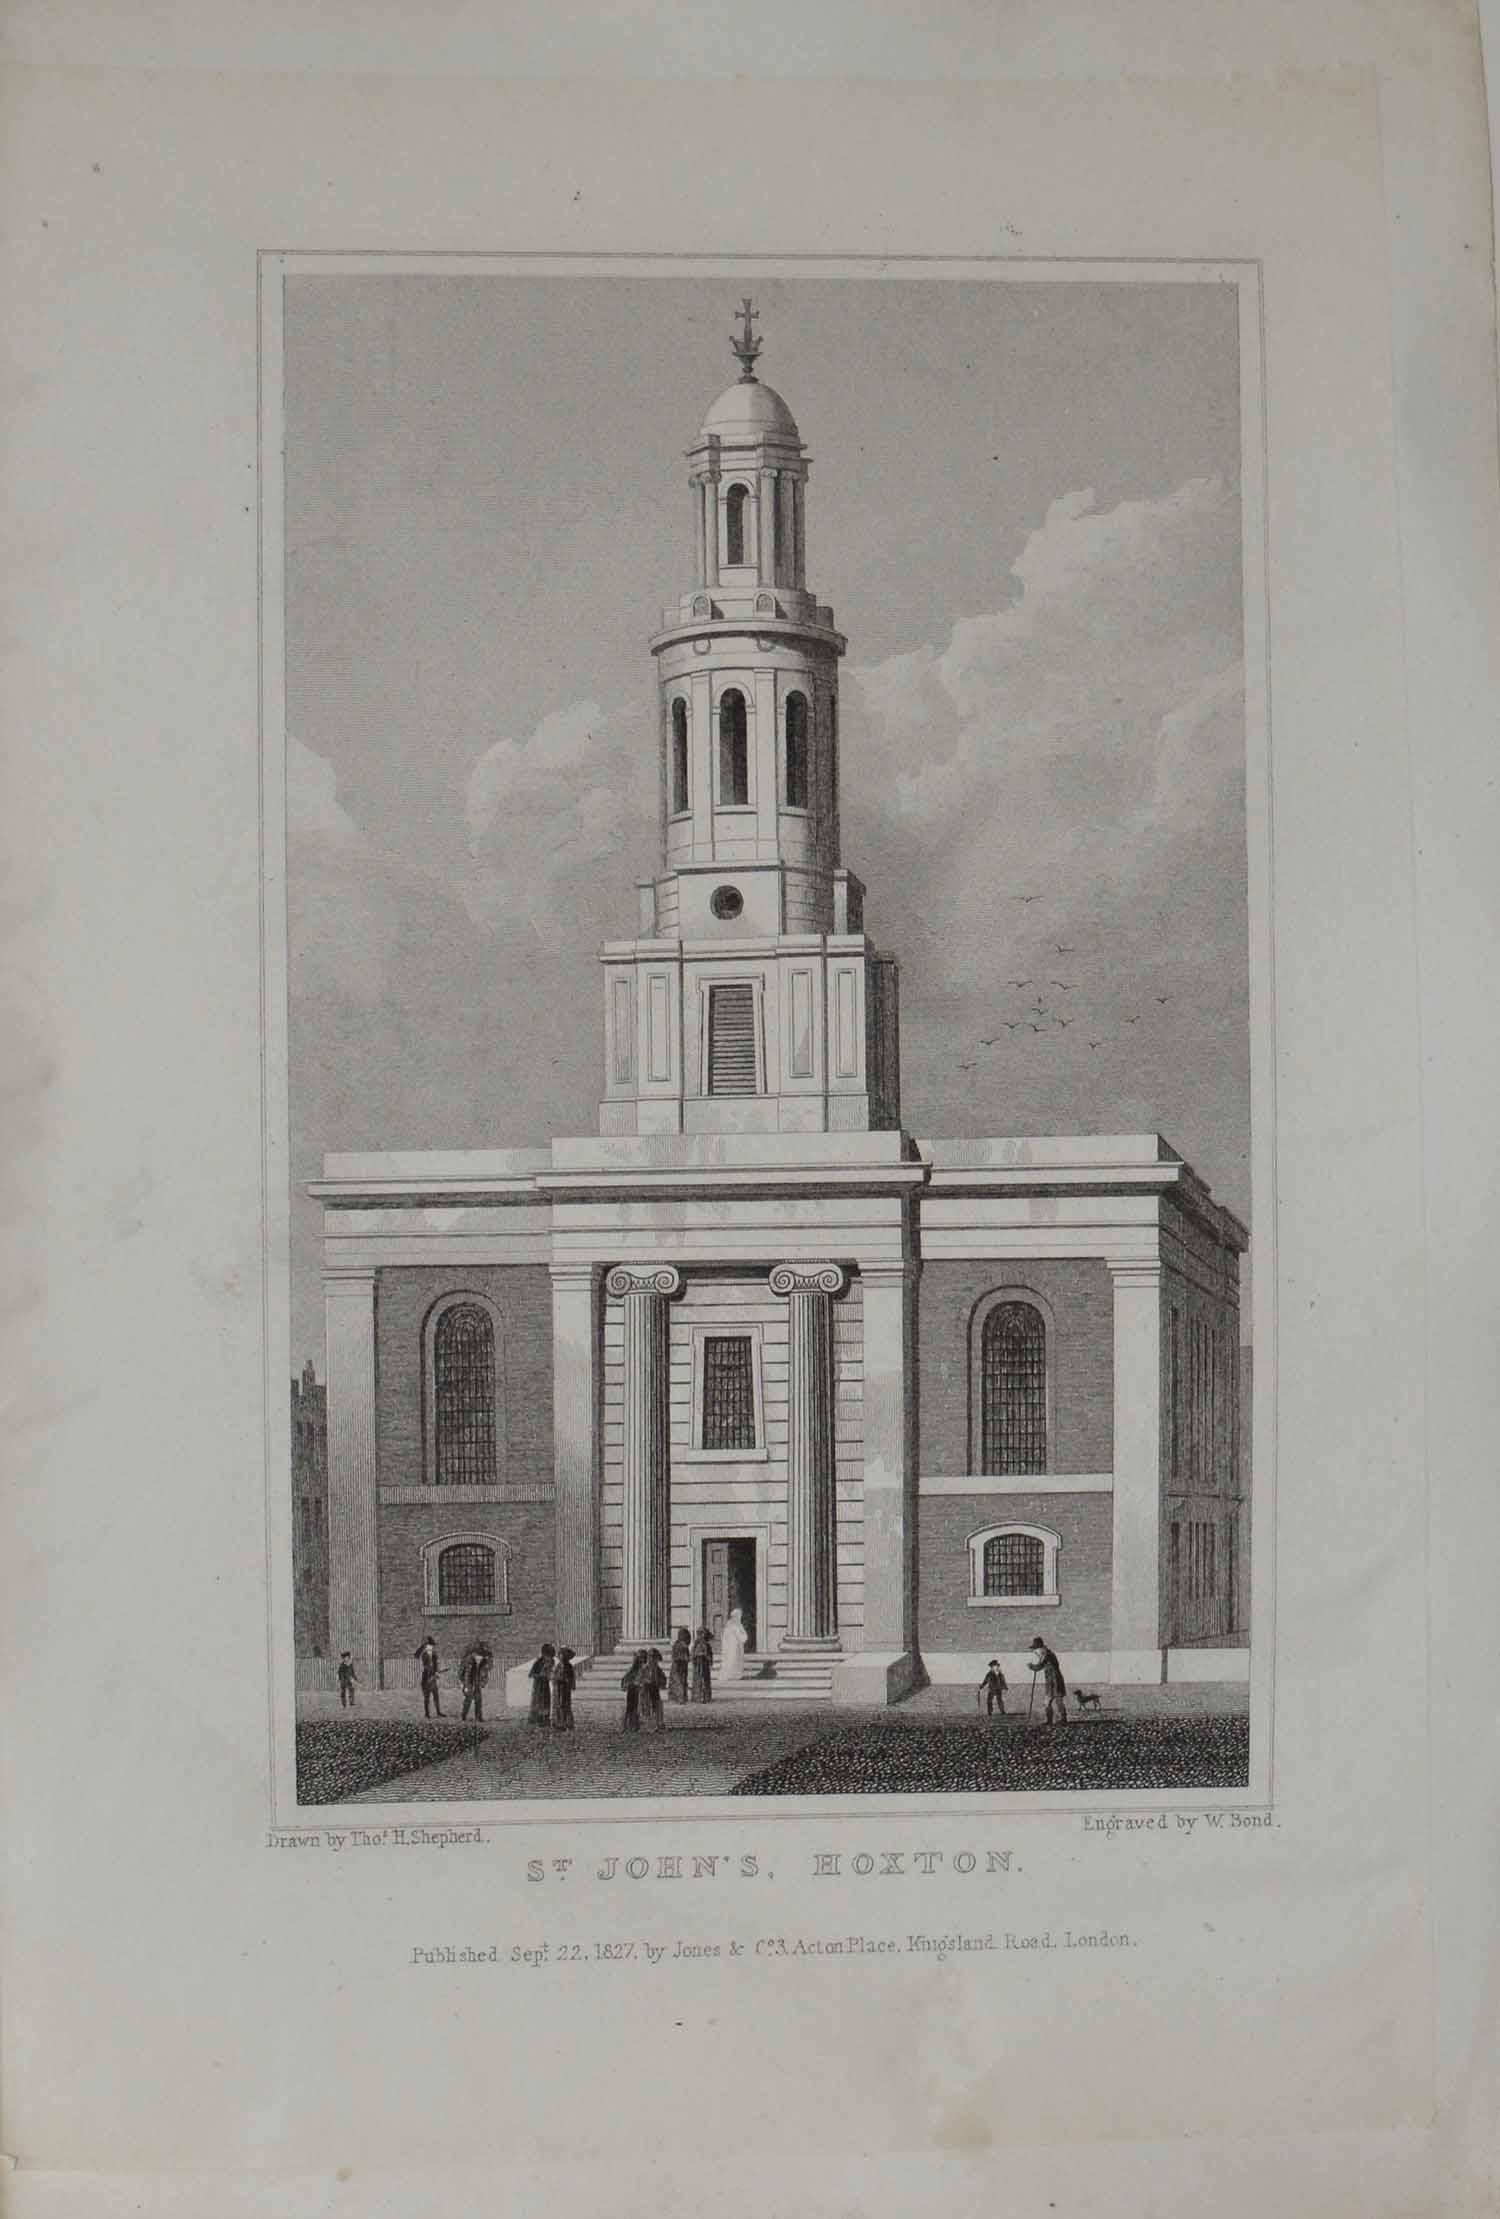 English Set of 9 Antique Architectural Prints of London Churches, 1828